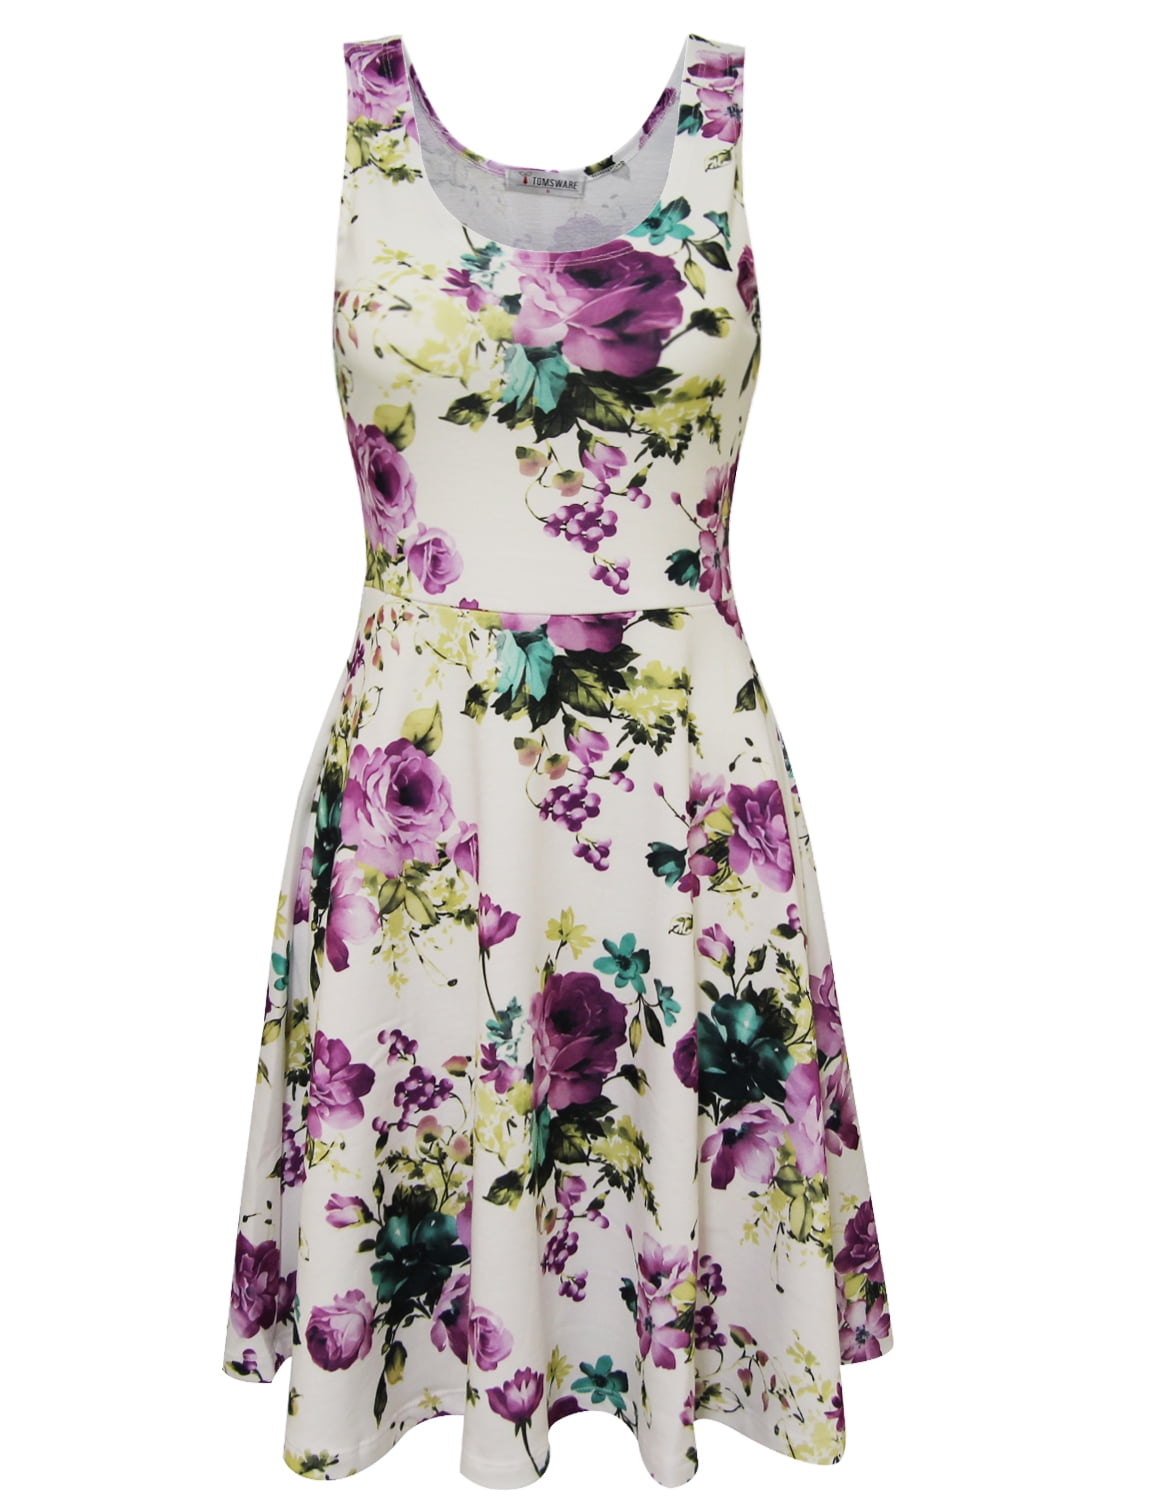 Tam Ware - TAM WARE Womens Casual Fit and Flare Floral Sleeveless Dress ...